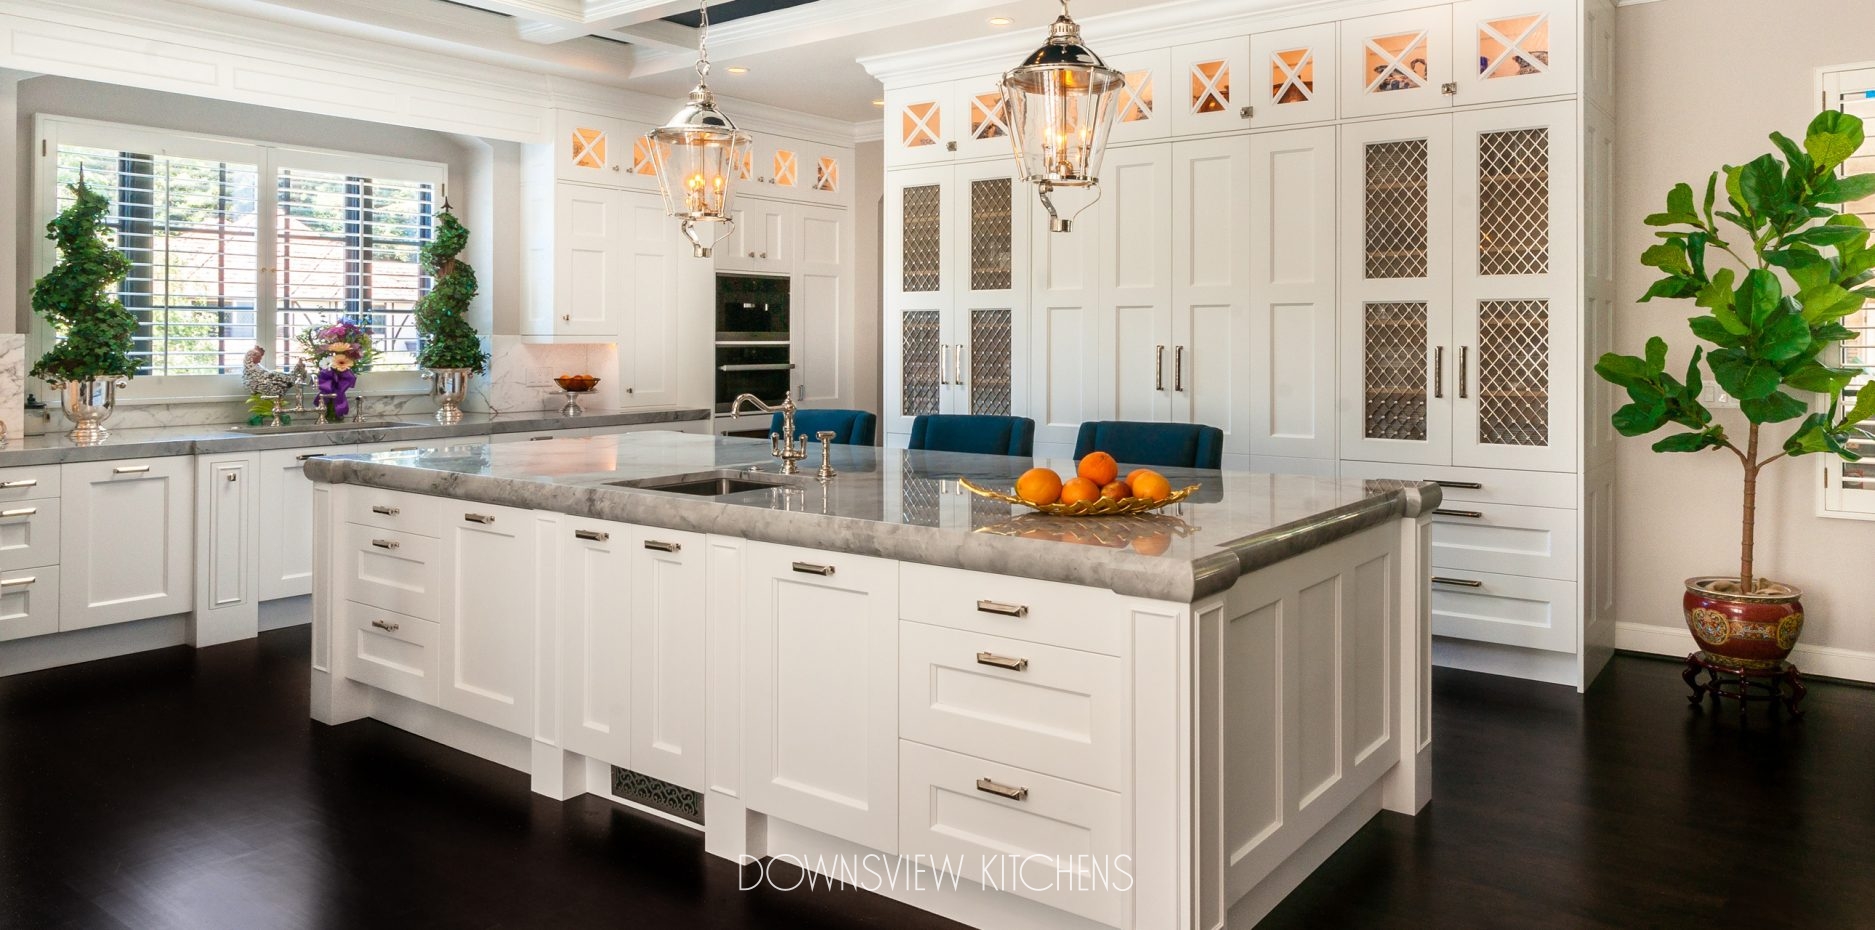 Classic Charm Downsview Kitchens And